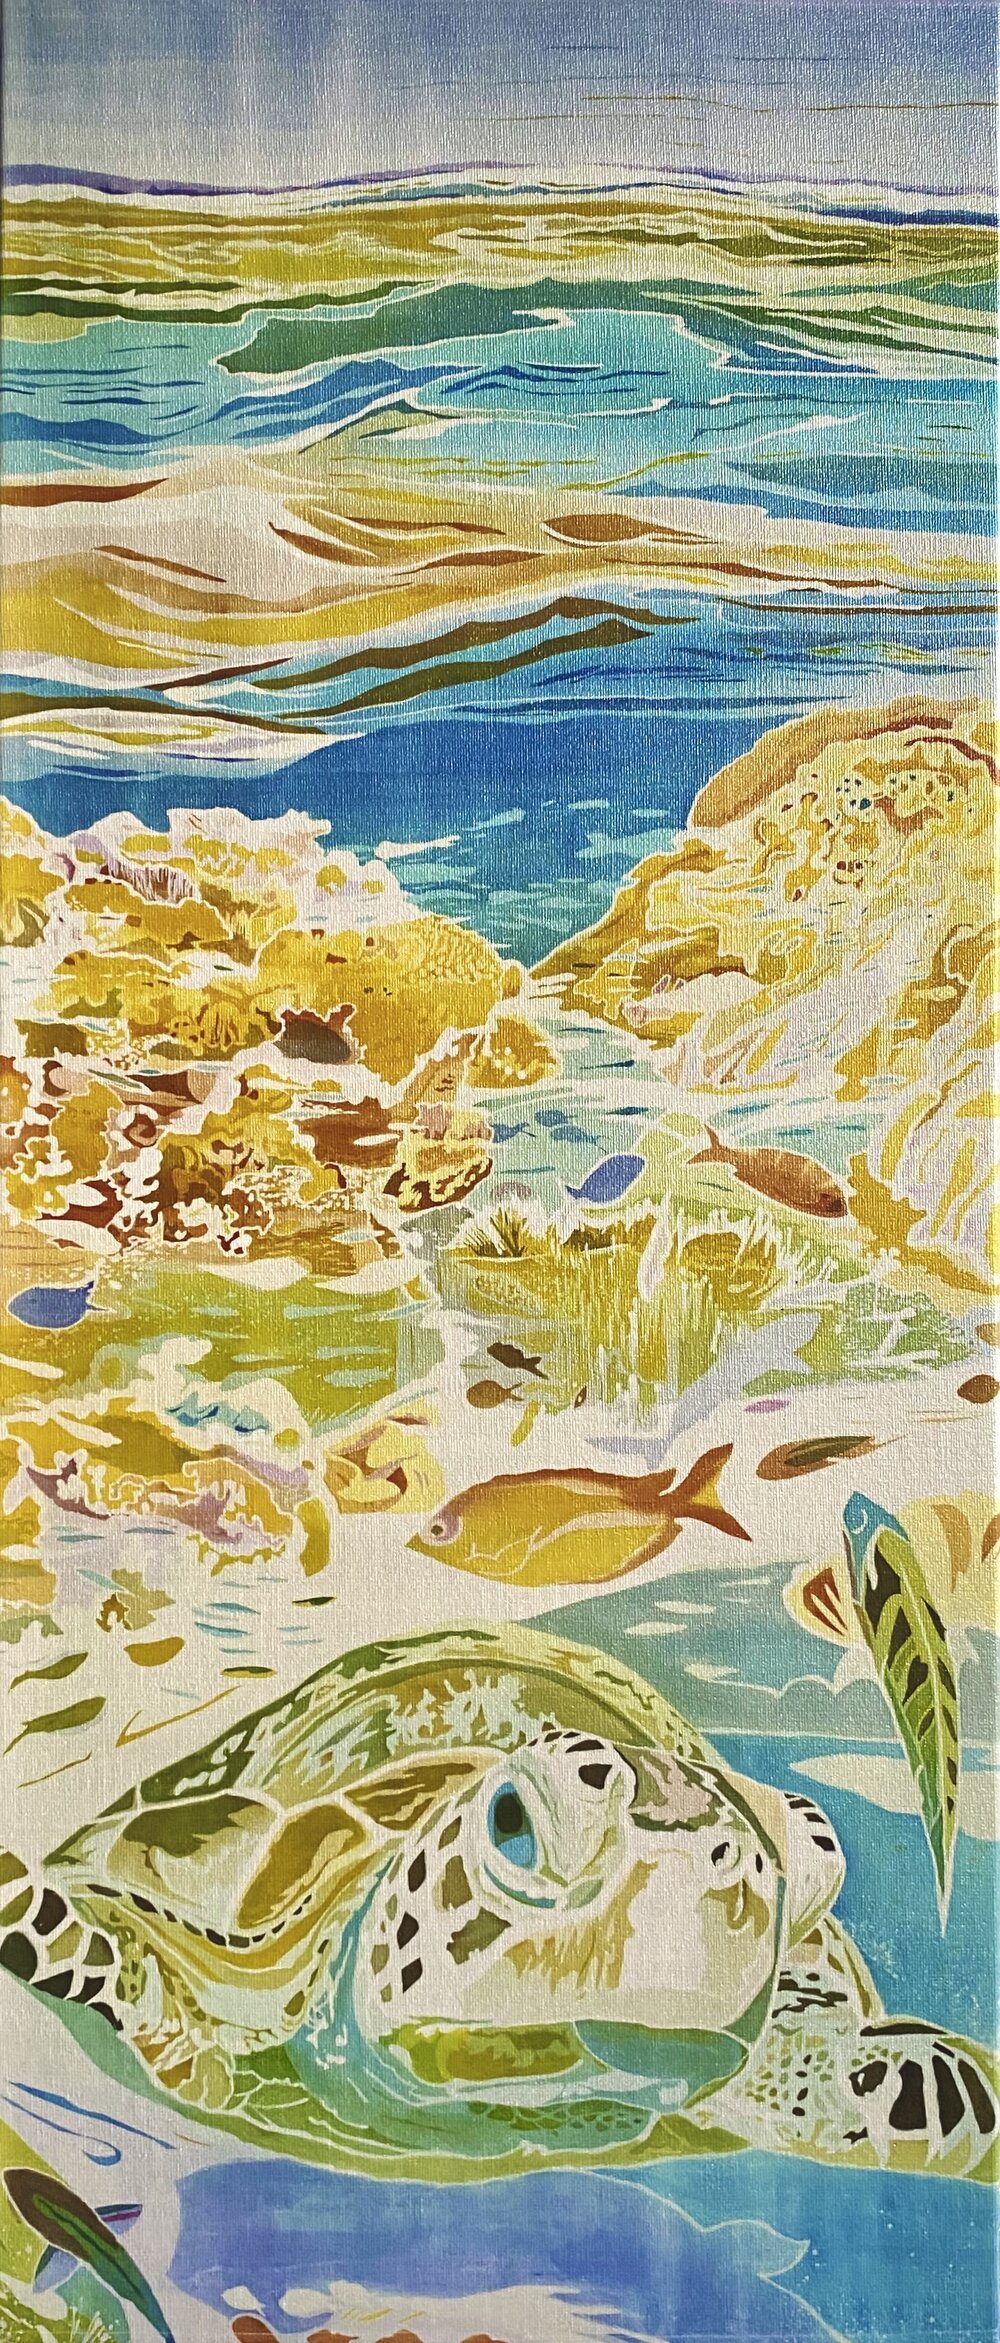 "Great Barrier Reef" by Mary Edna Fraser